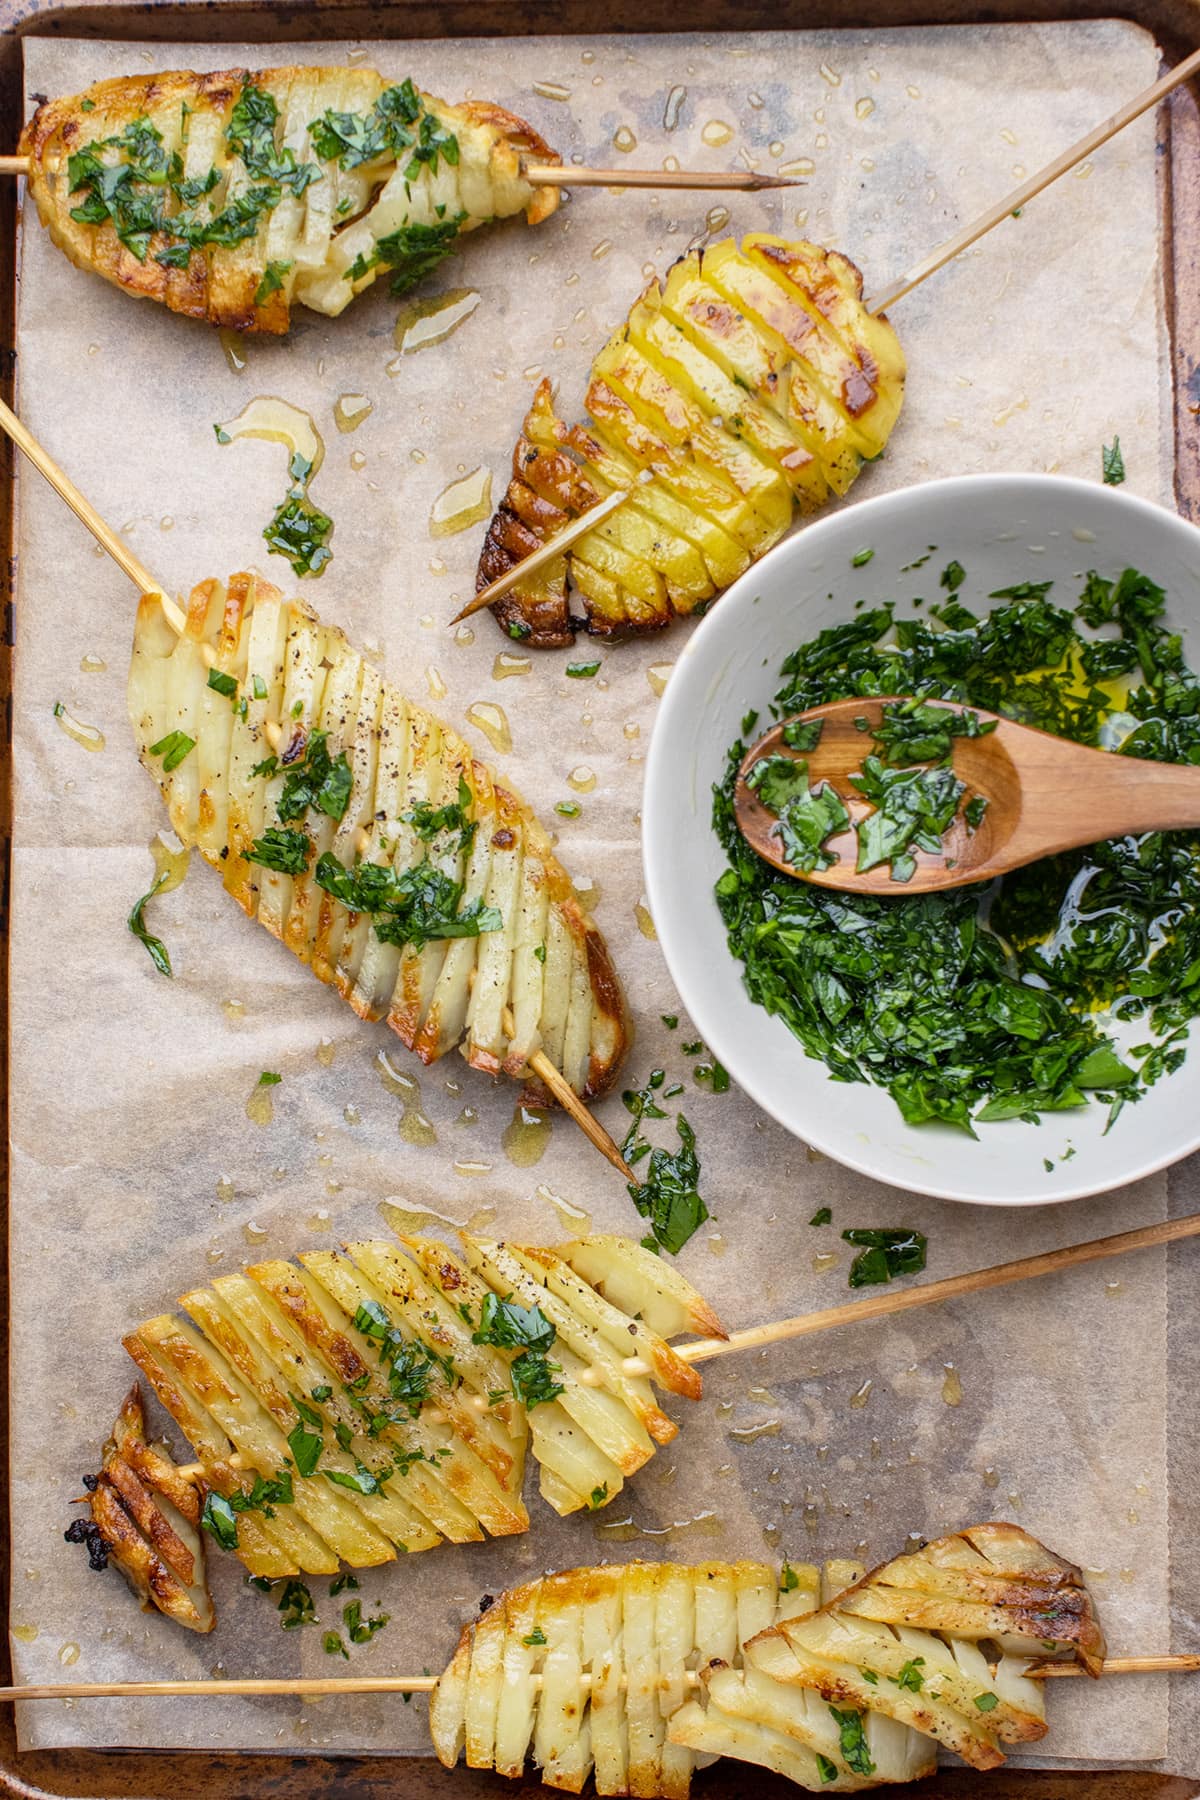 Overhead view of 5 accordion potato skewers on a baking sheet lined with parchment paper, next to a bowl of chimichurri sauce.